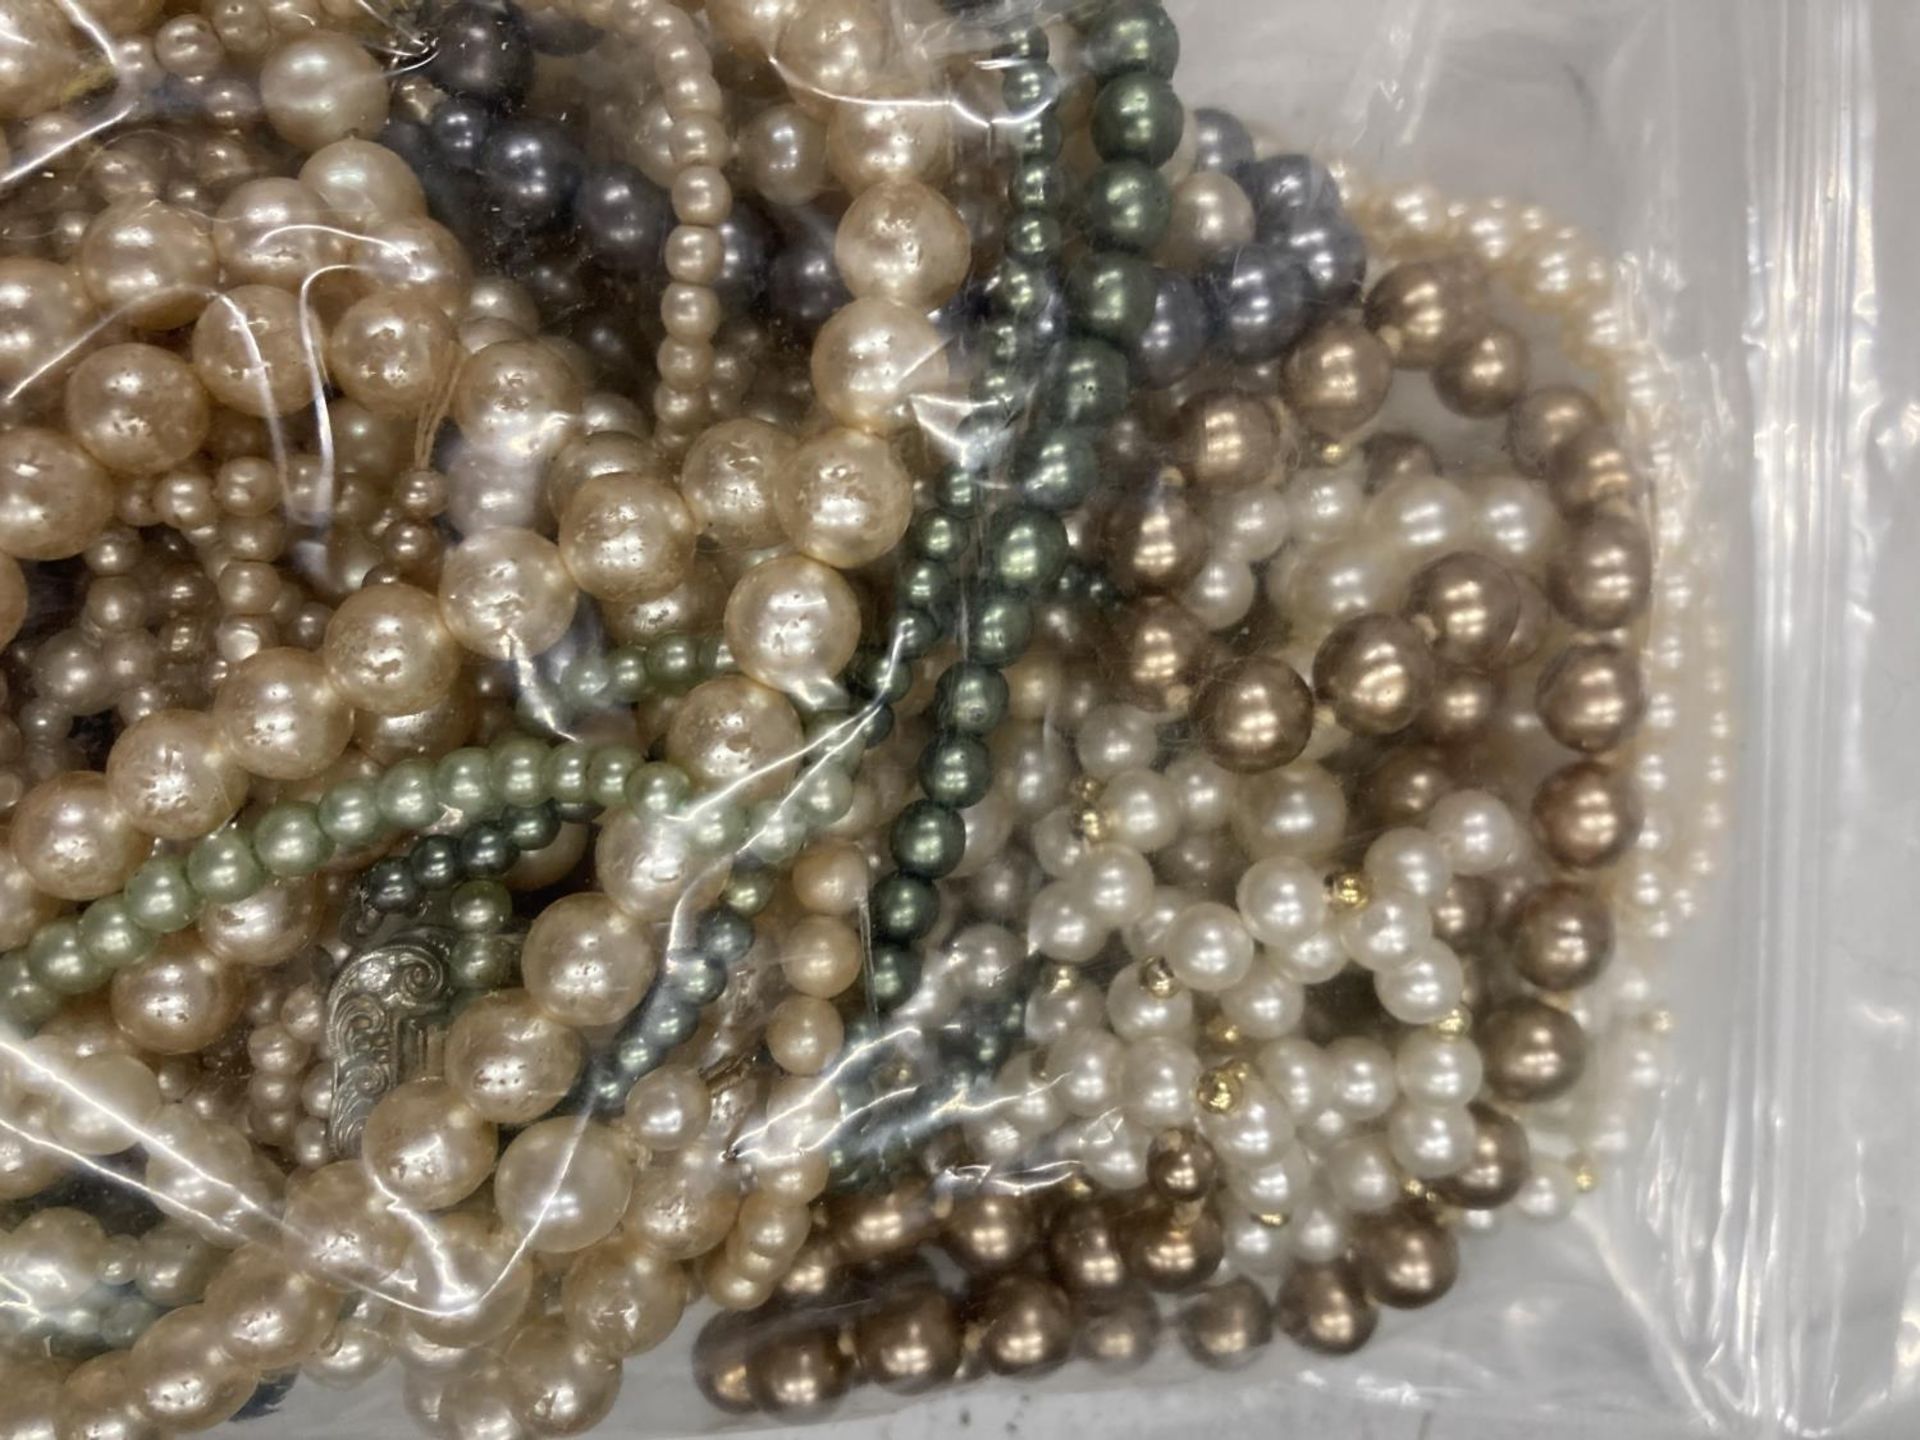 A LARGE QUANTITY OF PEARL NECKLACES - Image 2 of 3